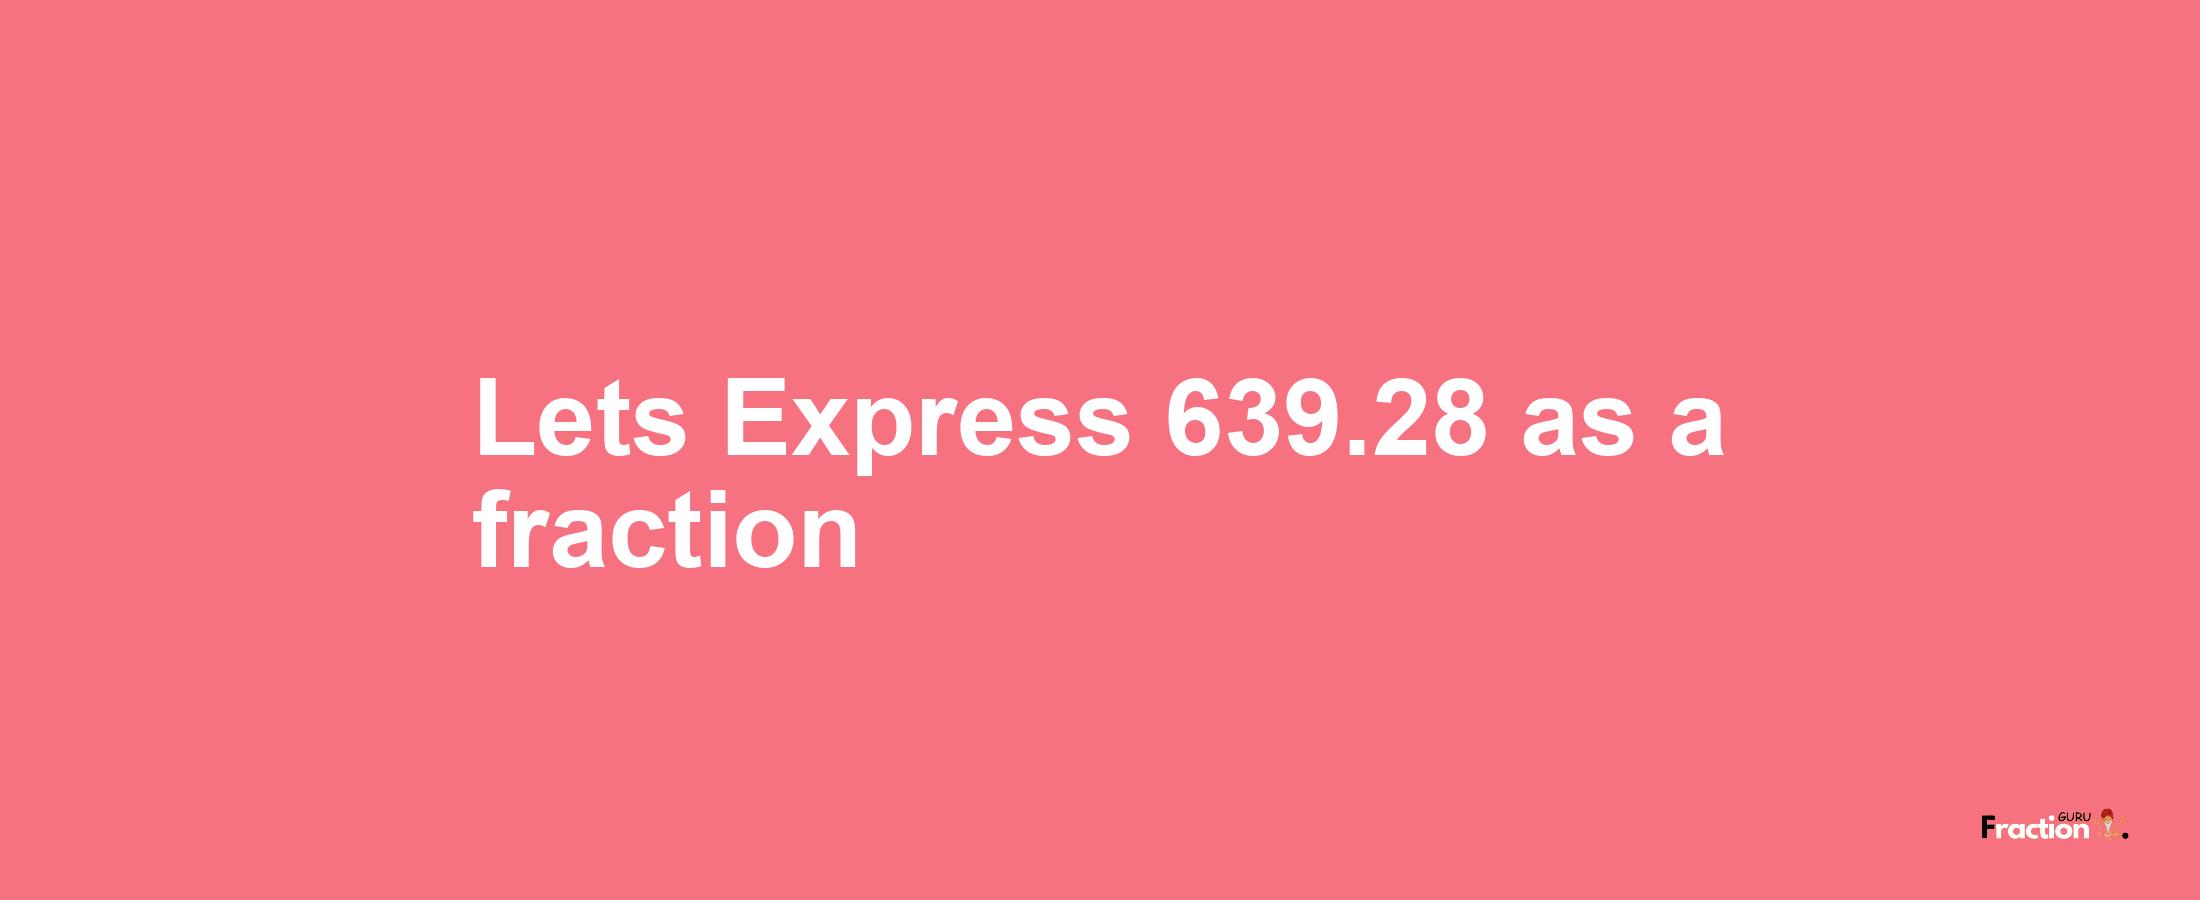 Lets Express 639.28 as afraction